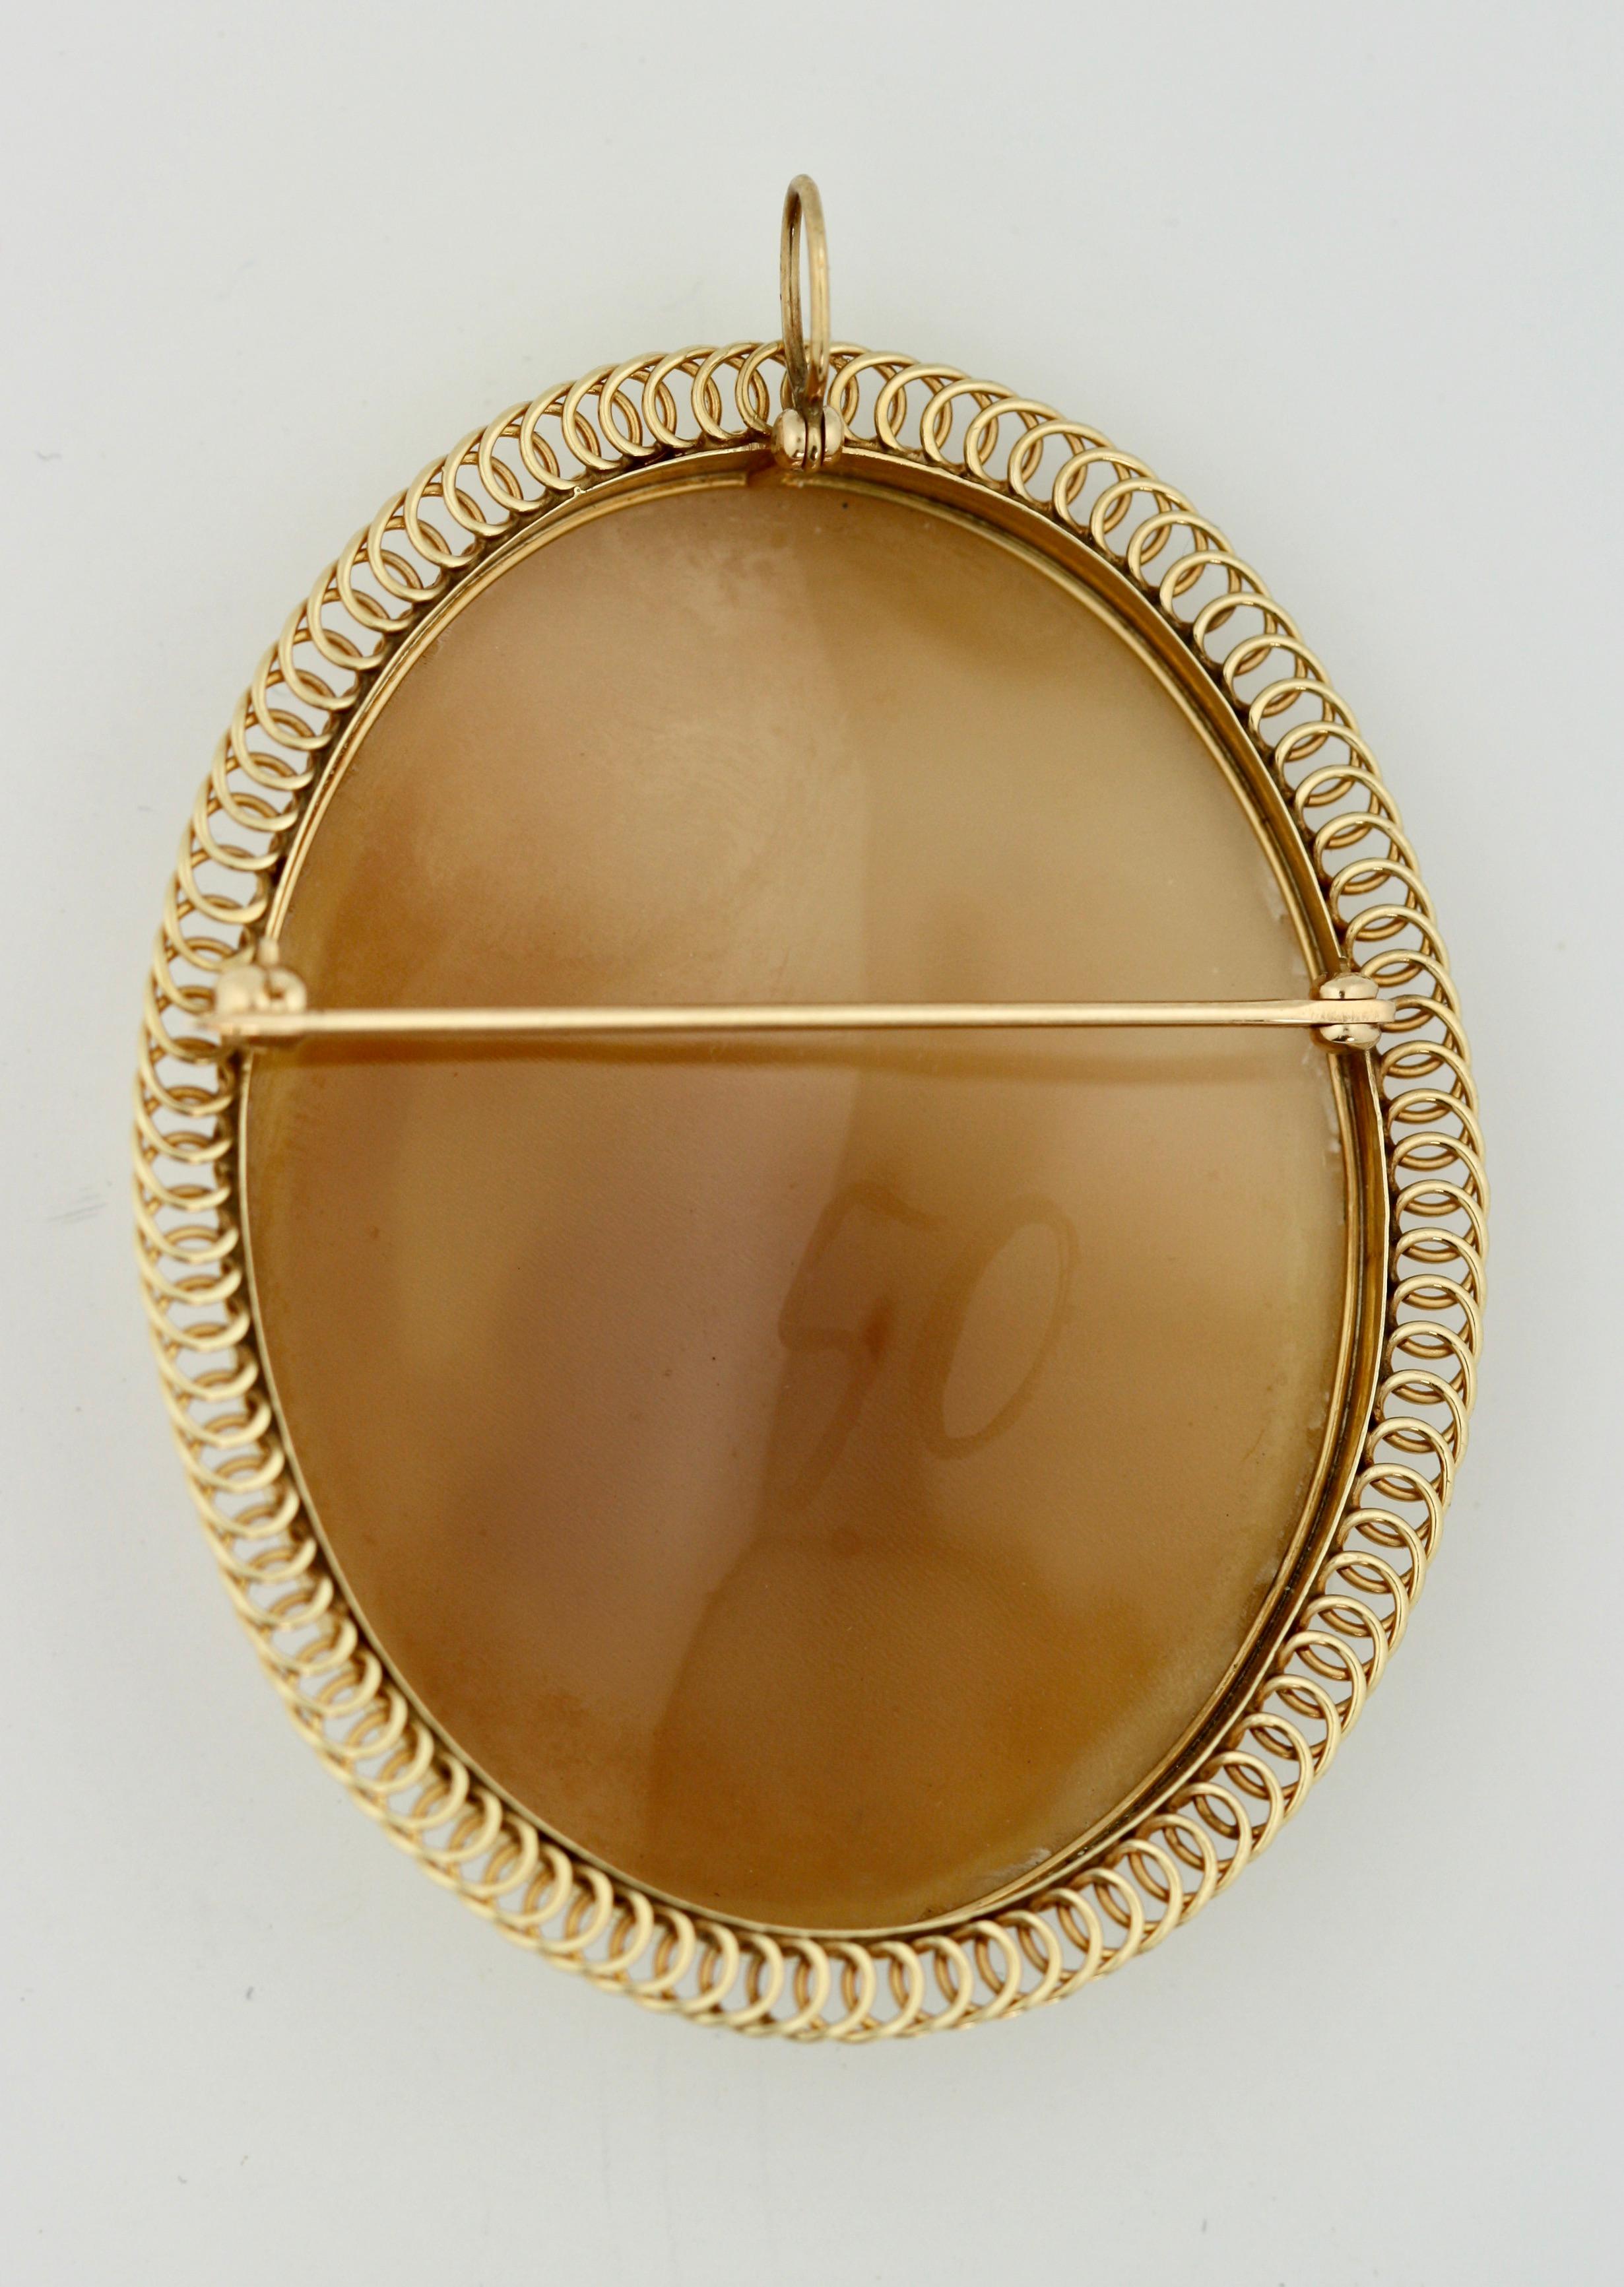 A Gold and Cameo Brooch, depicting a neo-classical scene in a decorative 14 kt gold foliate frame, brooch fitting, pendant hook 
2.25 in. (5.71 cm.) 